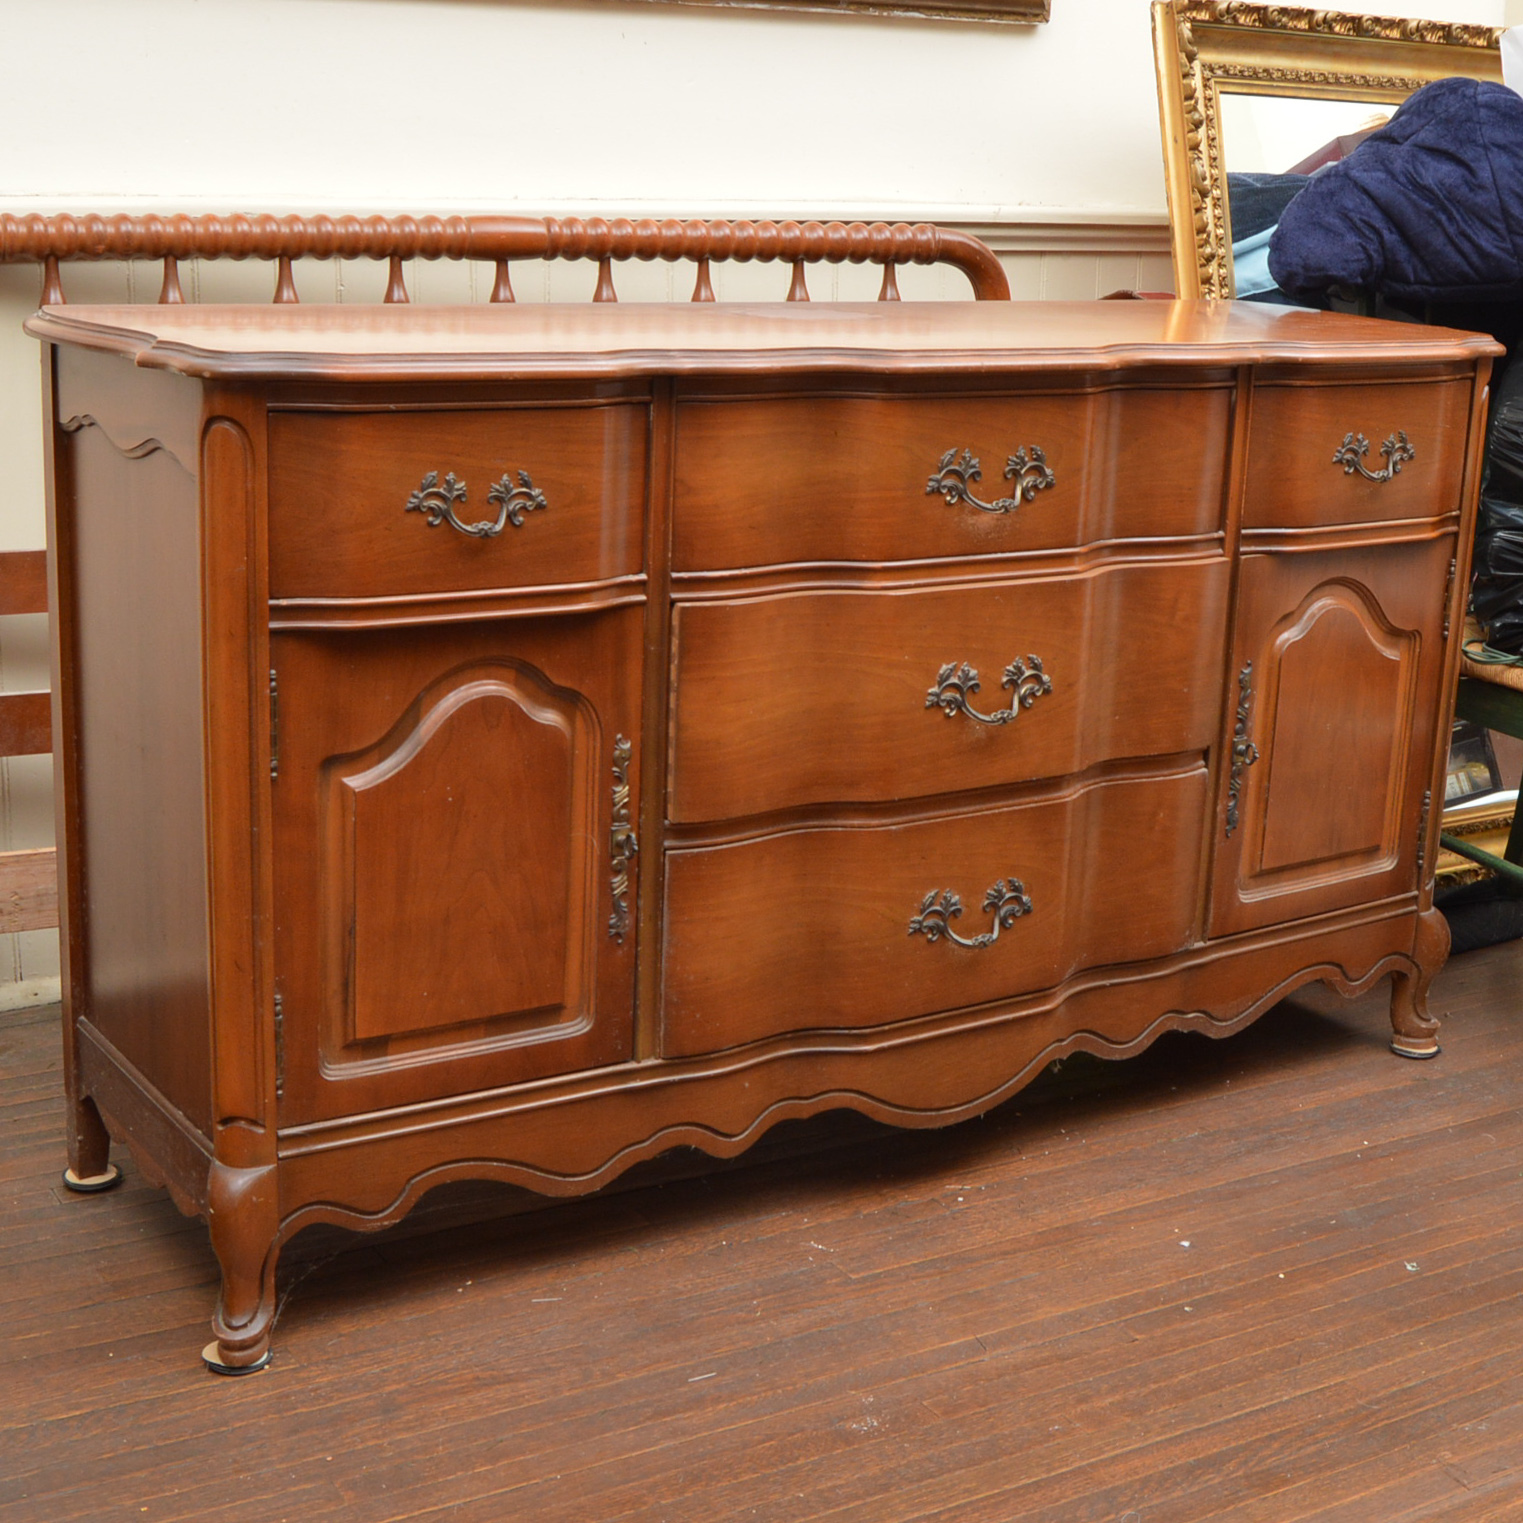 What To Look For In Secondhand Furniture